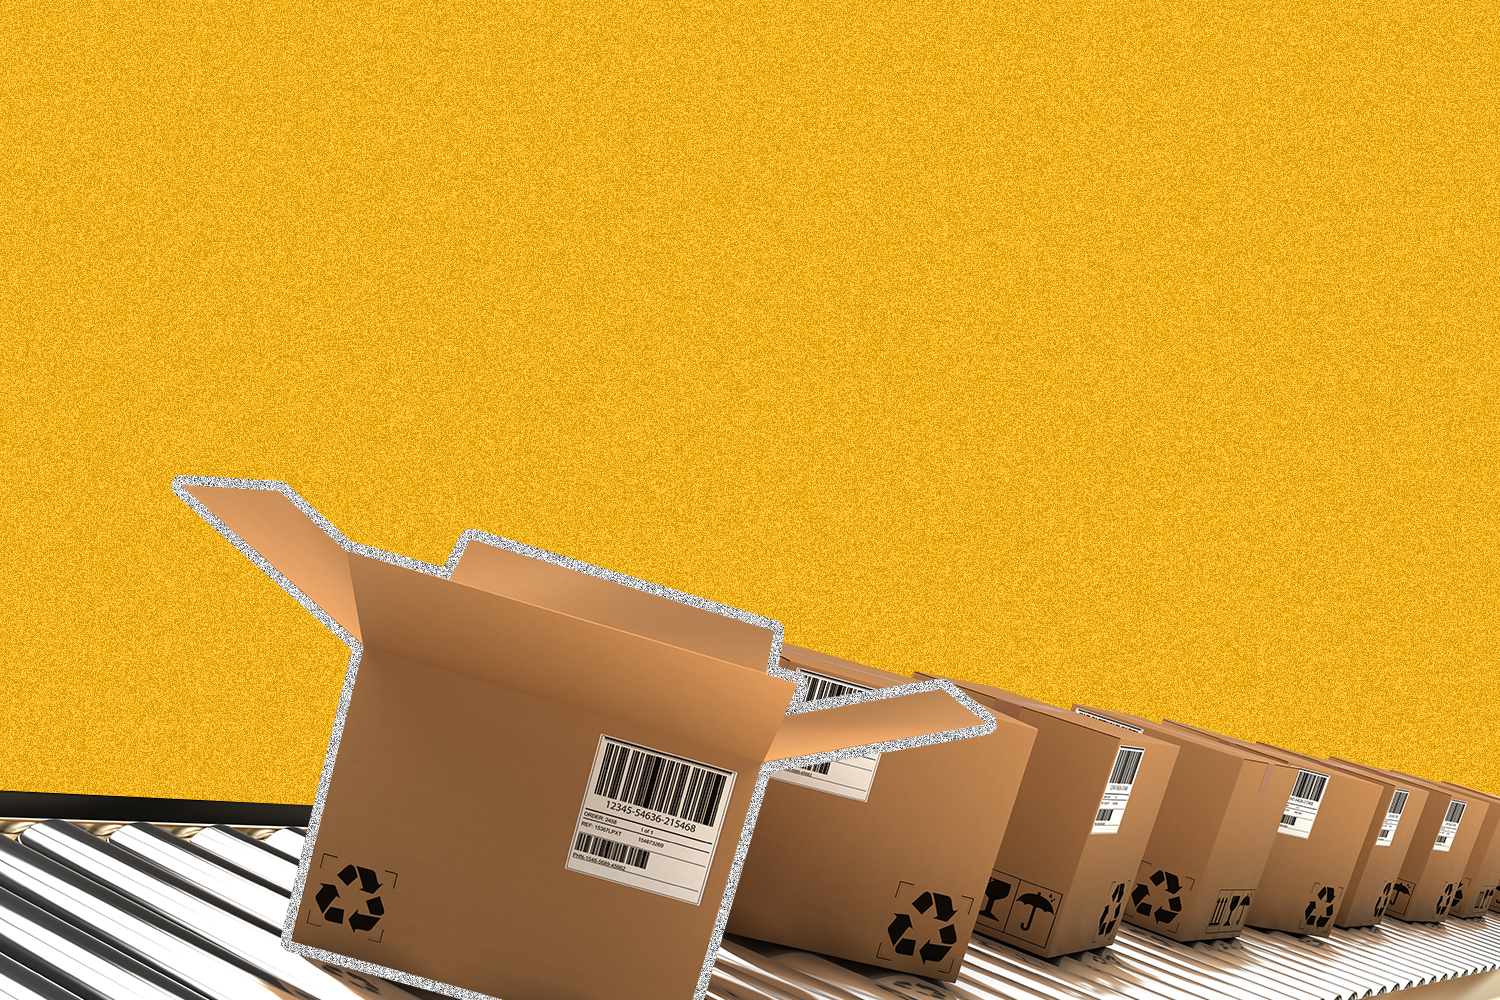 Cardboard shipping boxes lined up against a yellow background